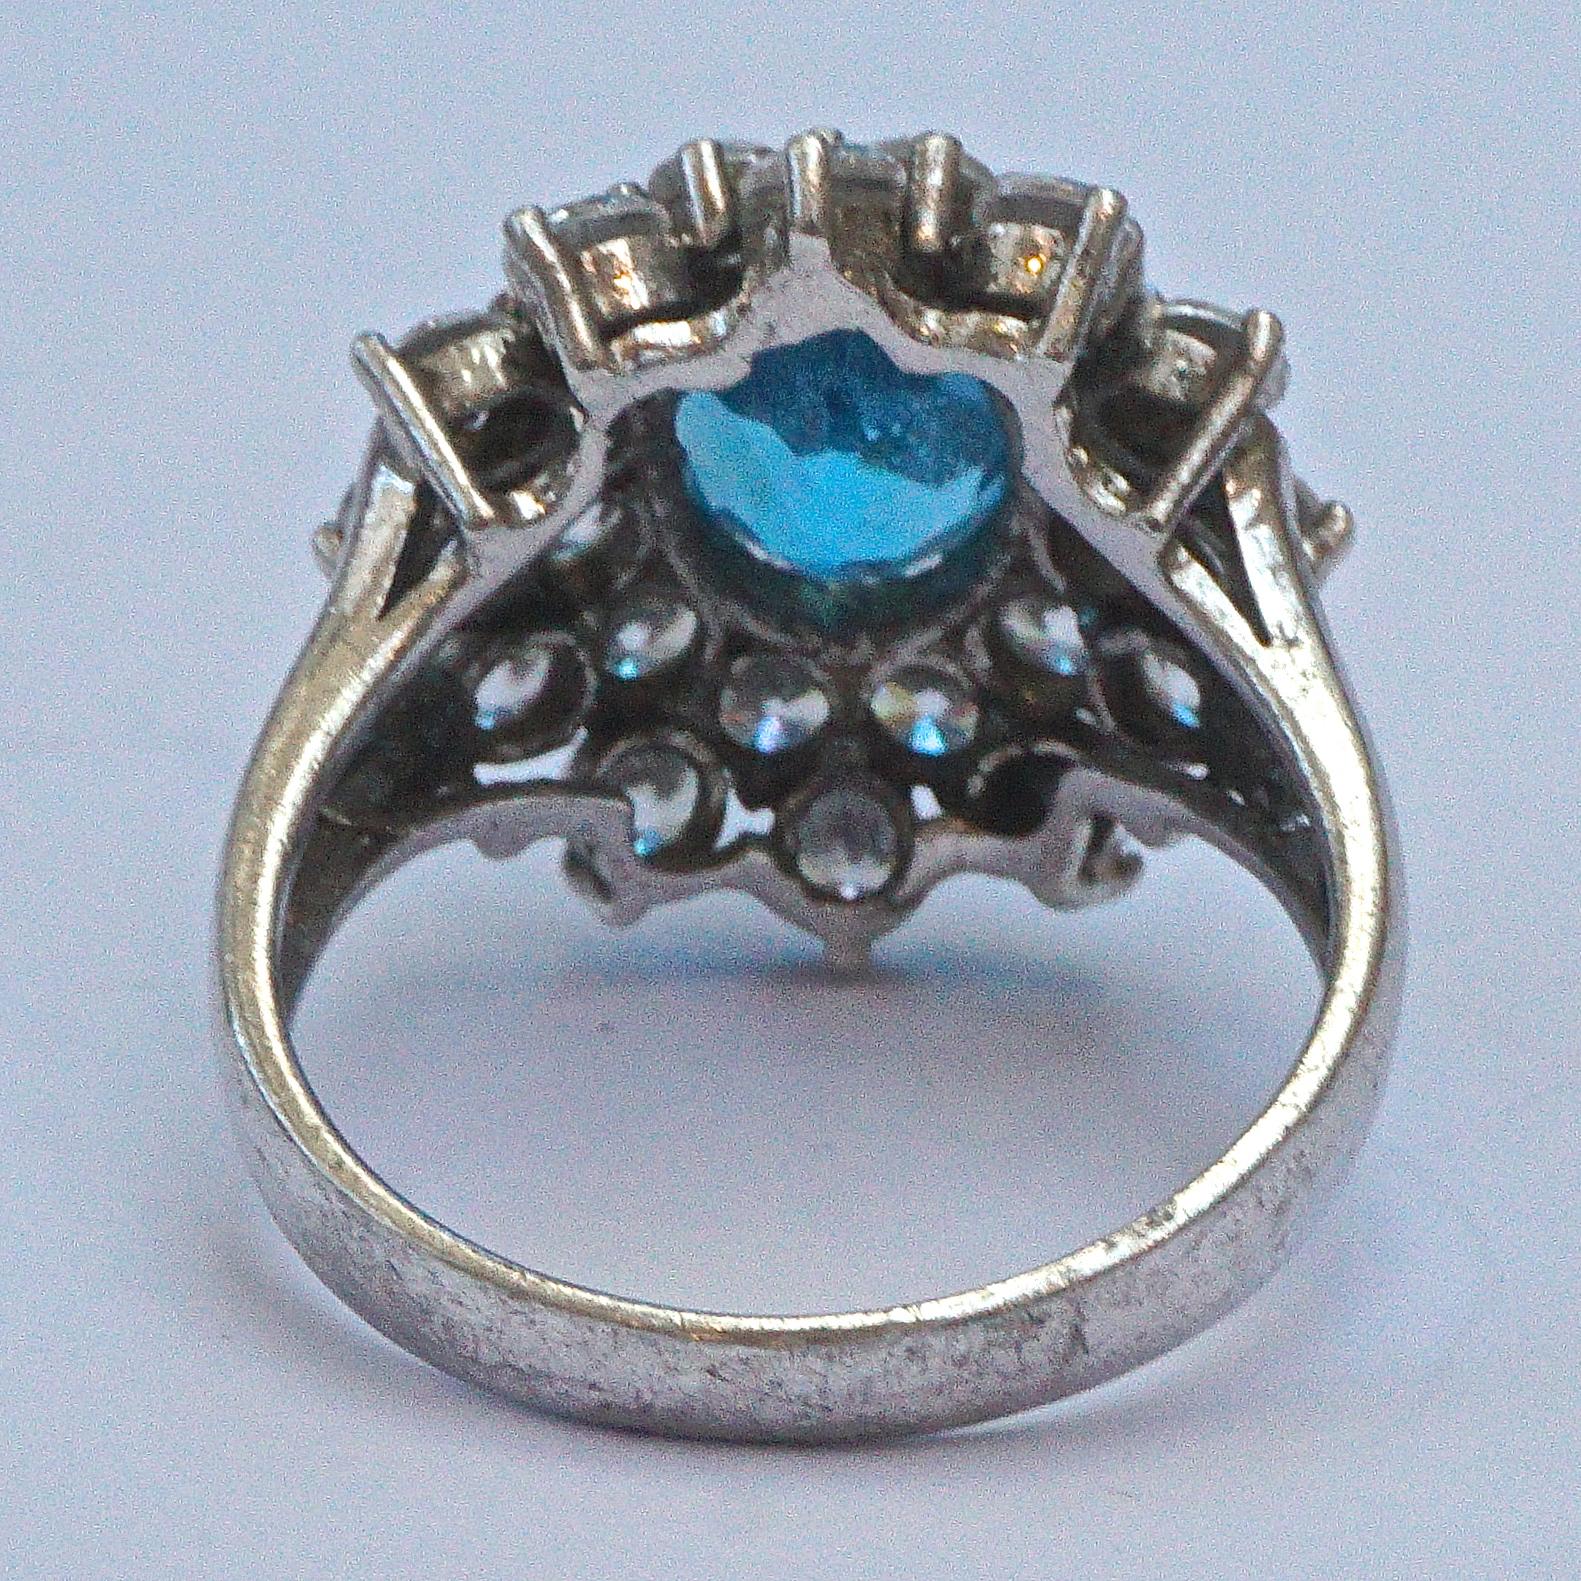 Beautiful sterling silver ring featuring an oval sea blue centre rhinestone, surrounded by  two rows of clear rhinestones. Ring size UK O 1/2 , US 7 1/4, inside diameter 1.8cm / .7 inch. The front measures 2cm / .78 inch by 1.9cm /  .74 inch.

This